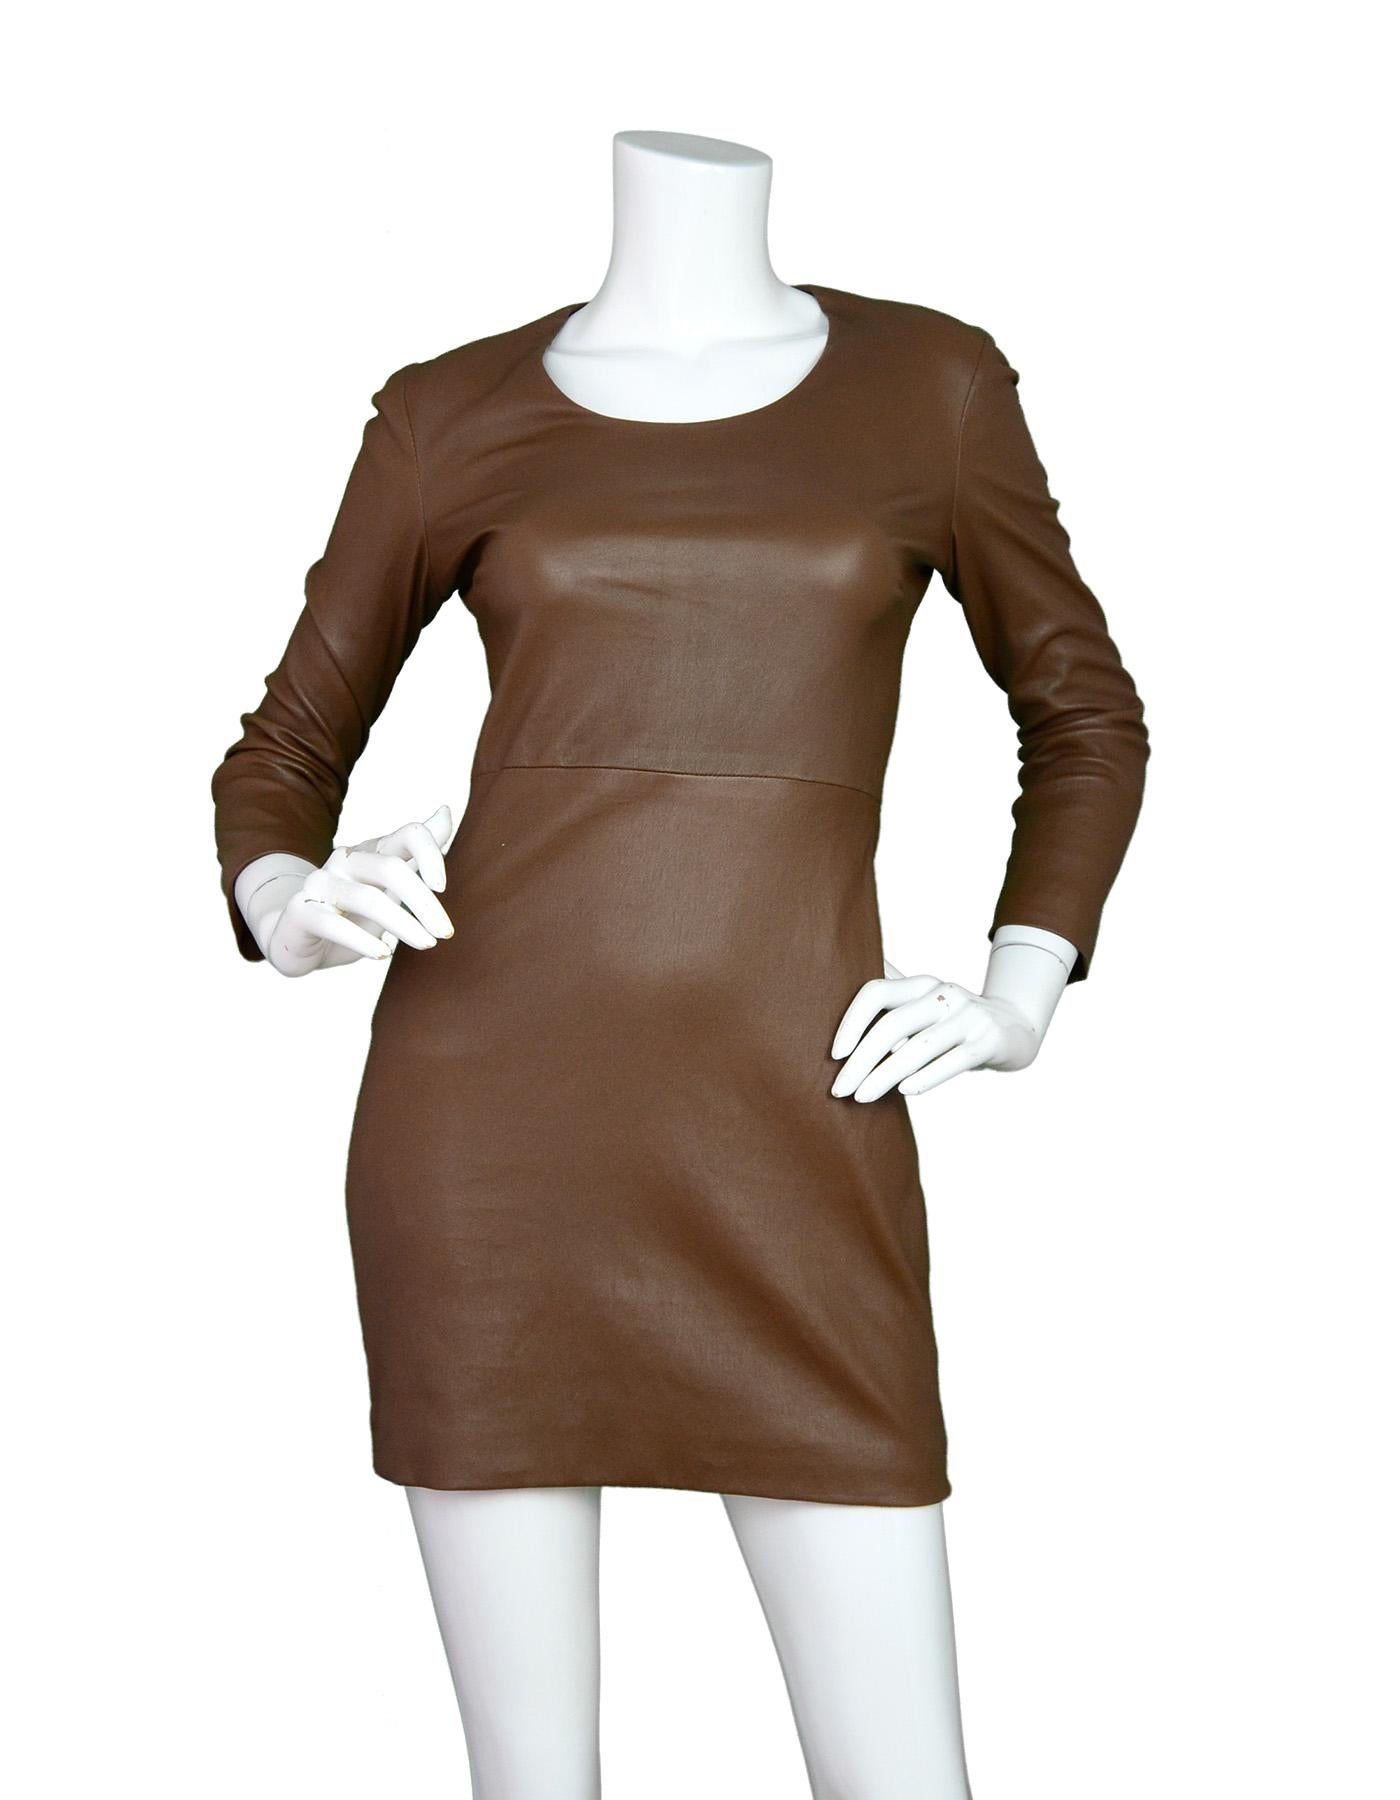 The Row Tobacco Leather Long Sleeve Scoop Neck Dress Sz S

Made In:  USA
Color: Tobacco brown
Materials: Shell: 100% lamb skin leather applied to 97% cotton, 3% Elastic
Lining: 95% Silk, 5% elastic 
Opening/Closure: Hidden back zipper
Overall